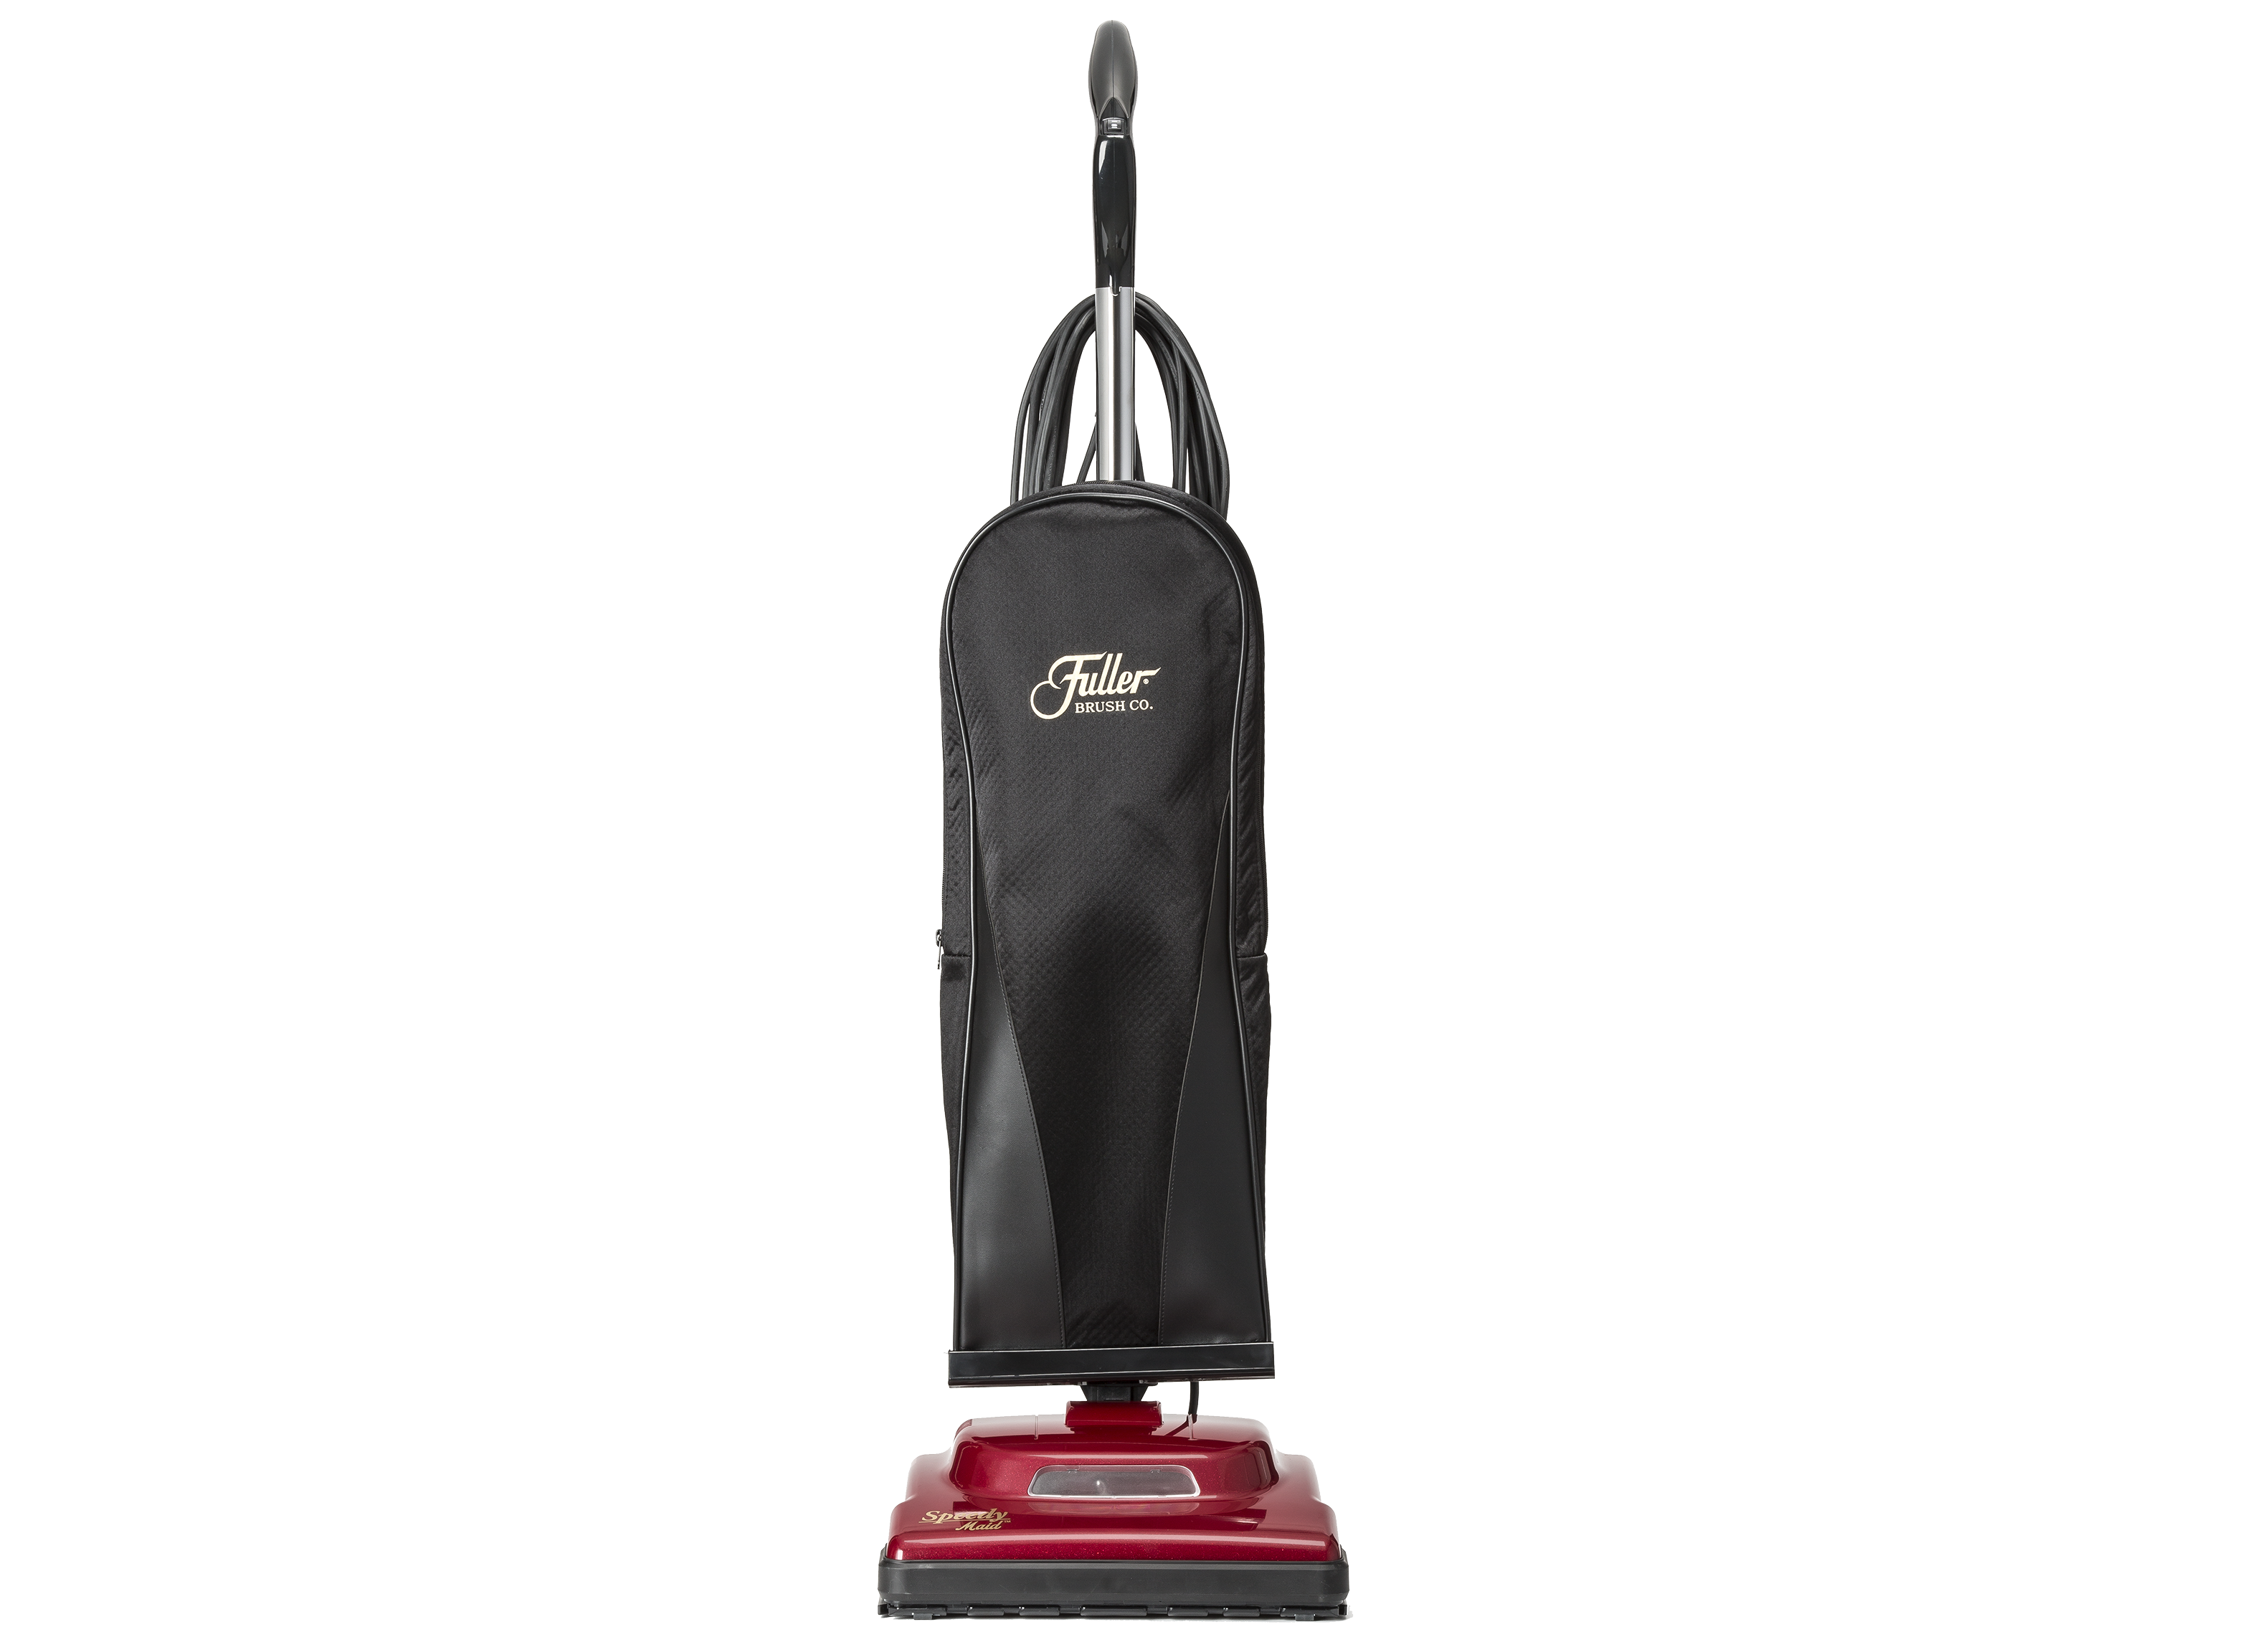 https://crdms.images.consumerreports.org/prod/products/cr/models/380785-uprightvacuumcleaners-fullerbrush-speedymaidfbsm.png